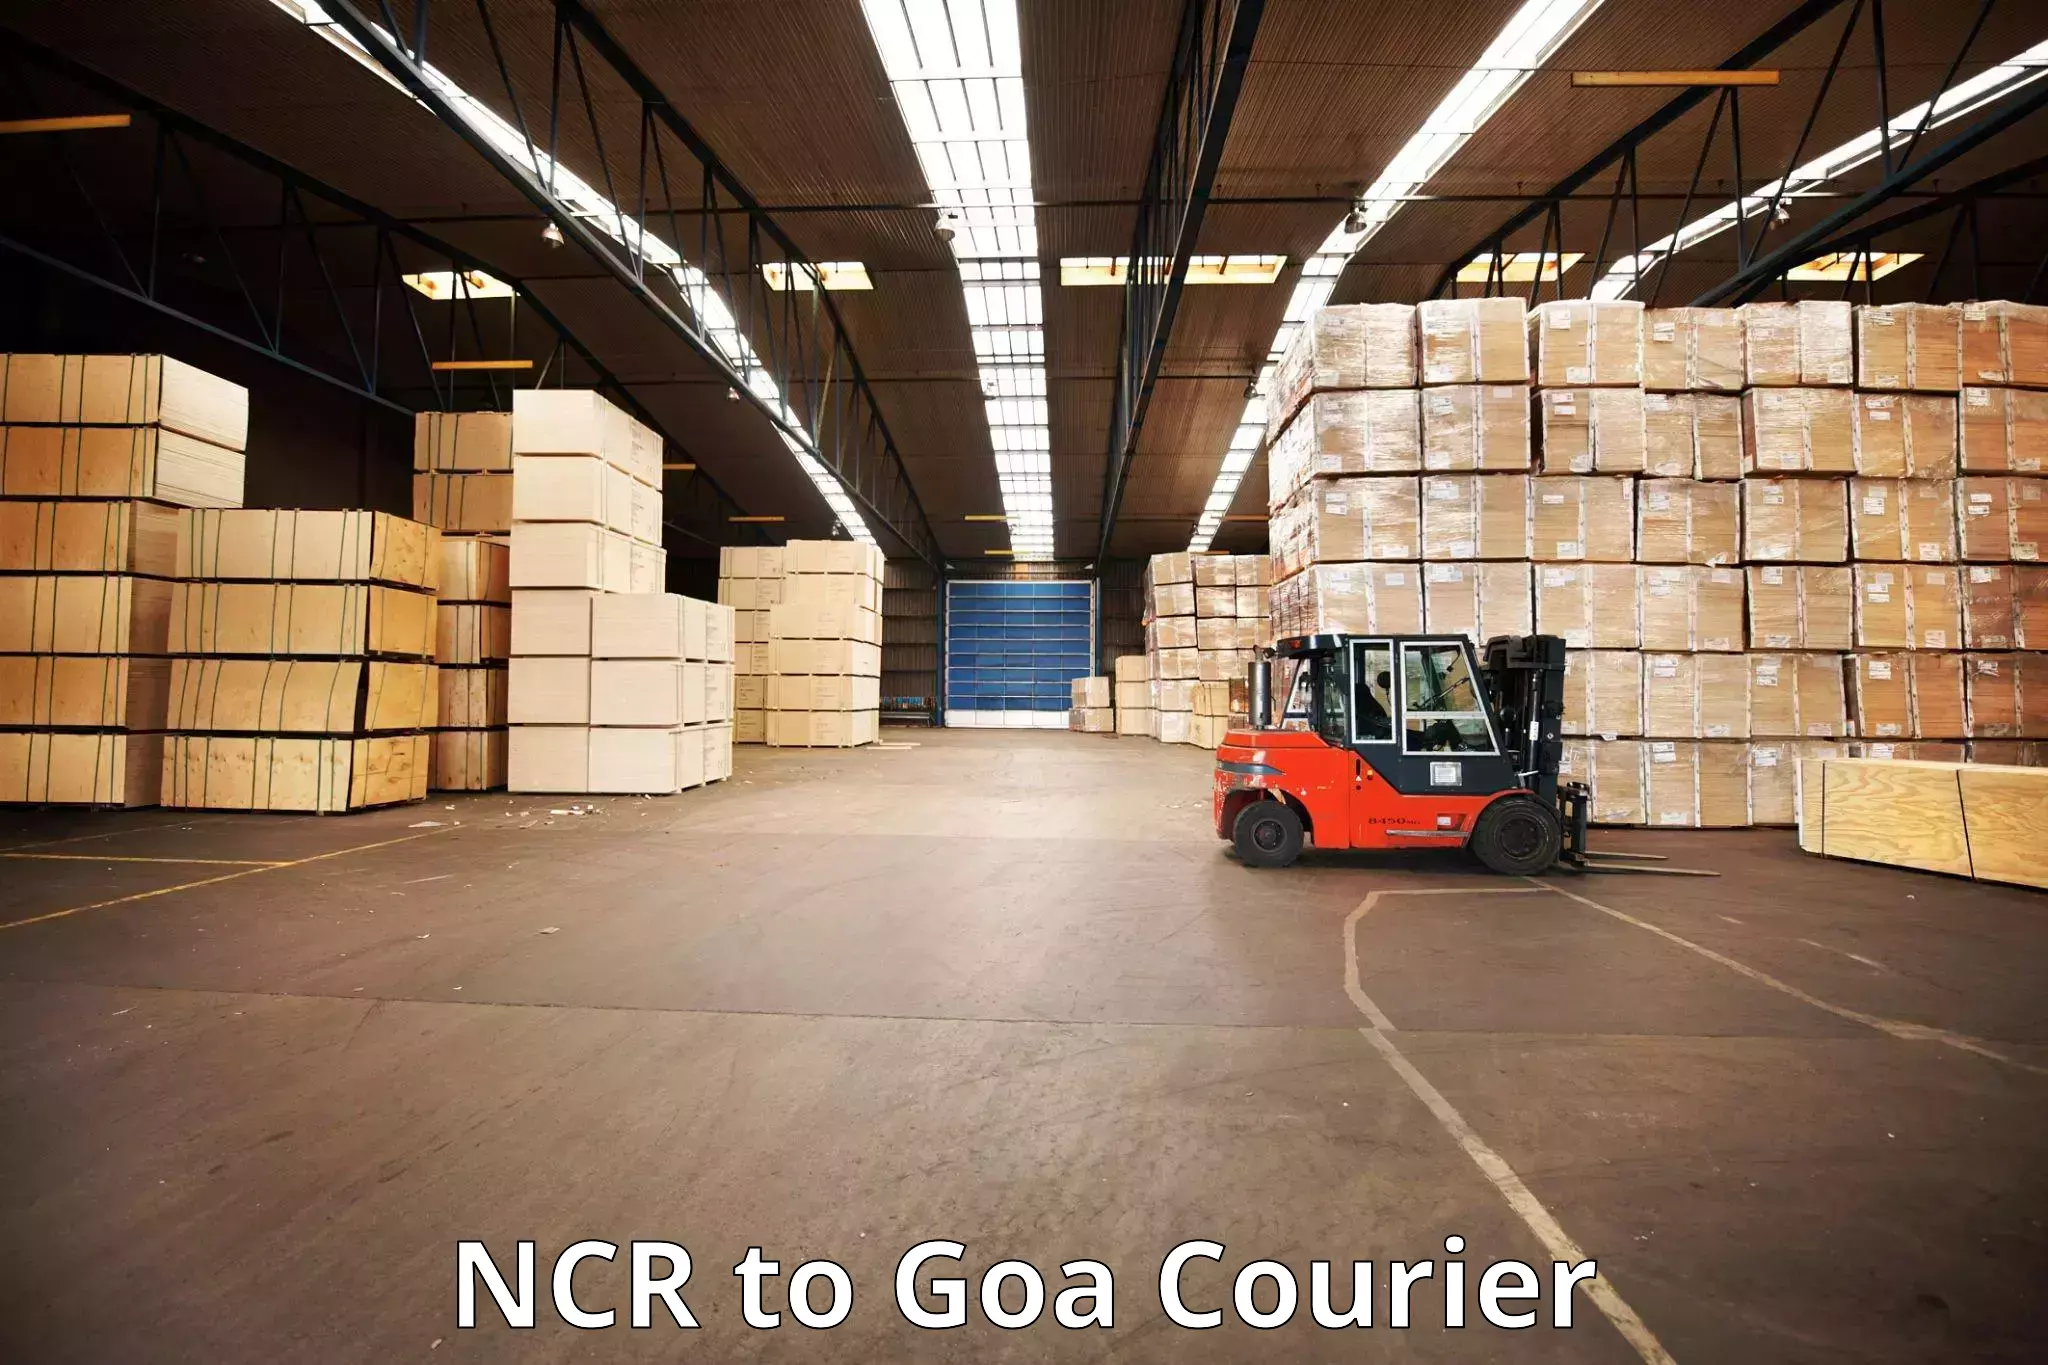 Nationwide luggage courier NCR to Goa University